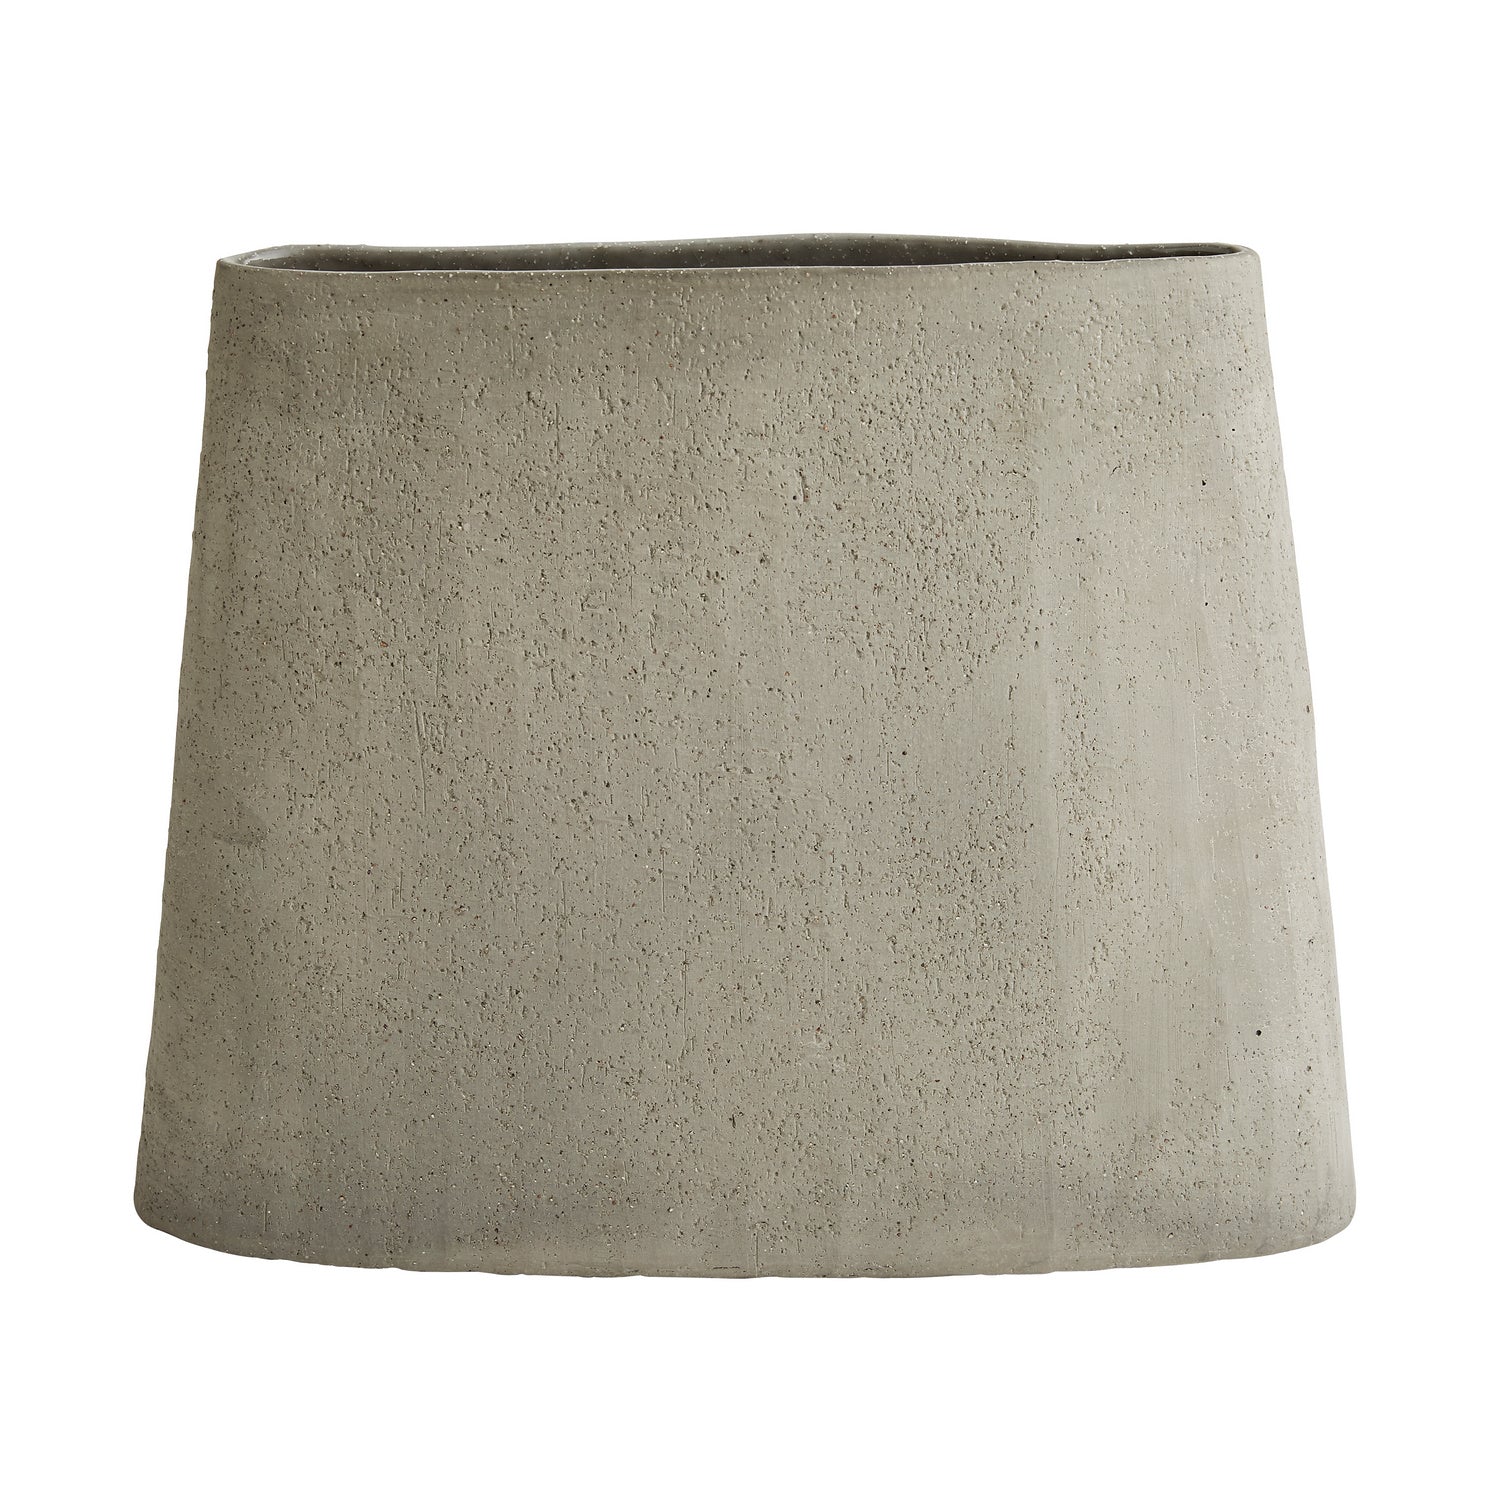 Vases, Set of 3 from the Hasta collection in Gray finish